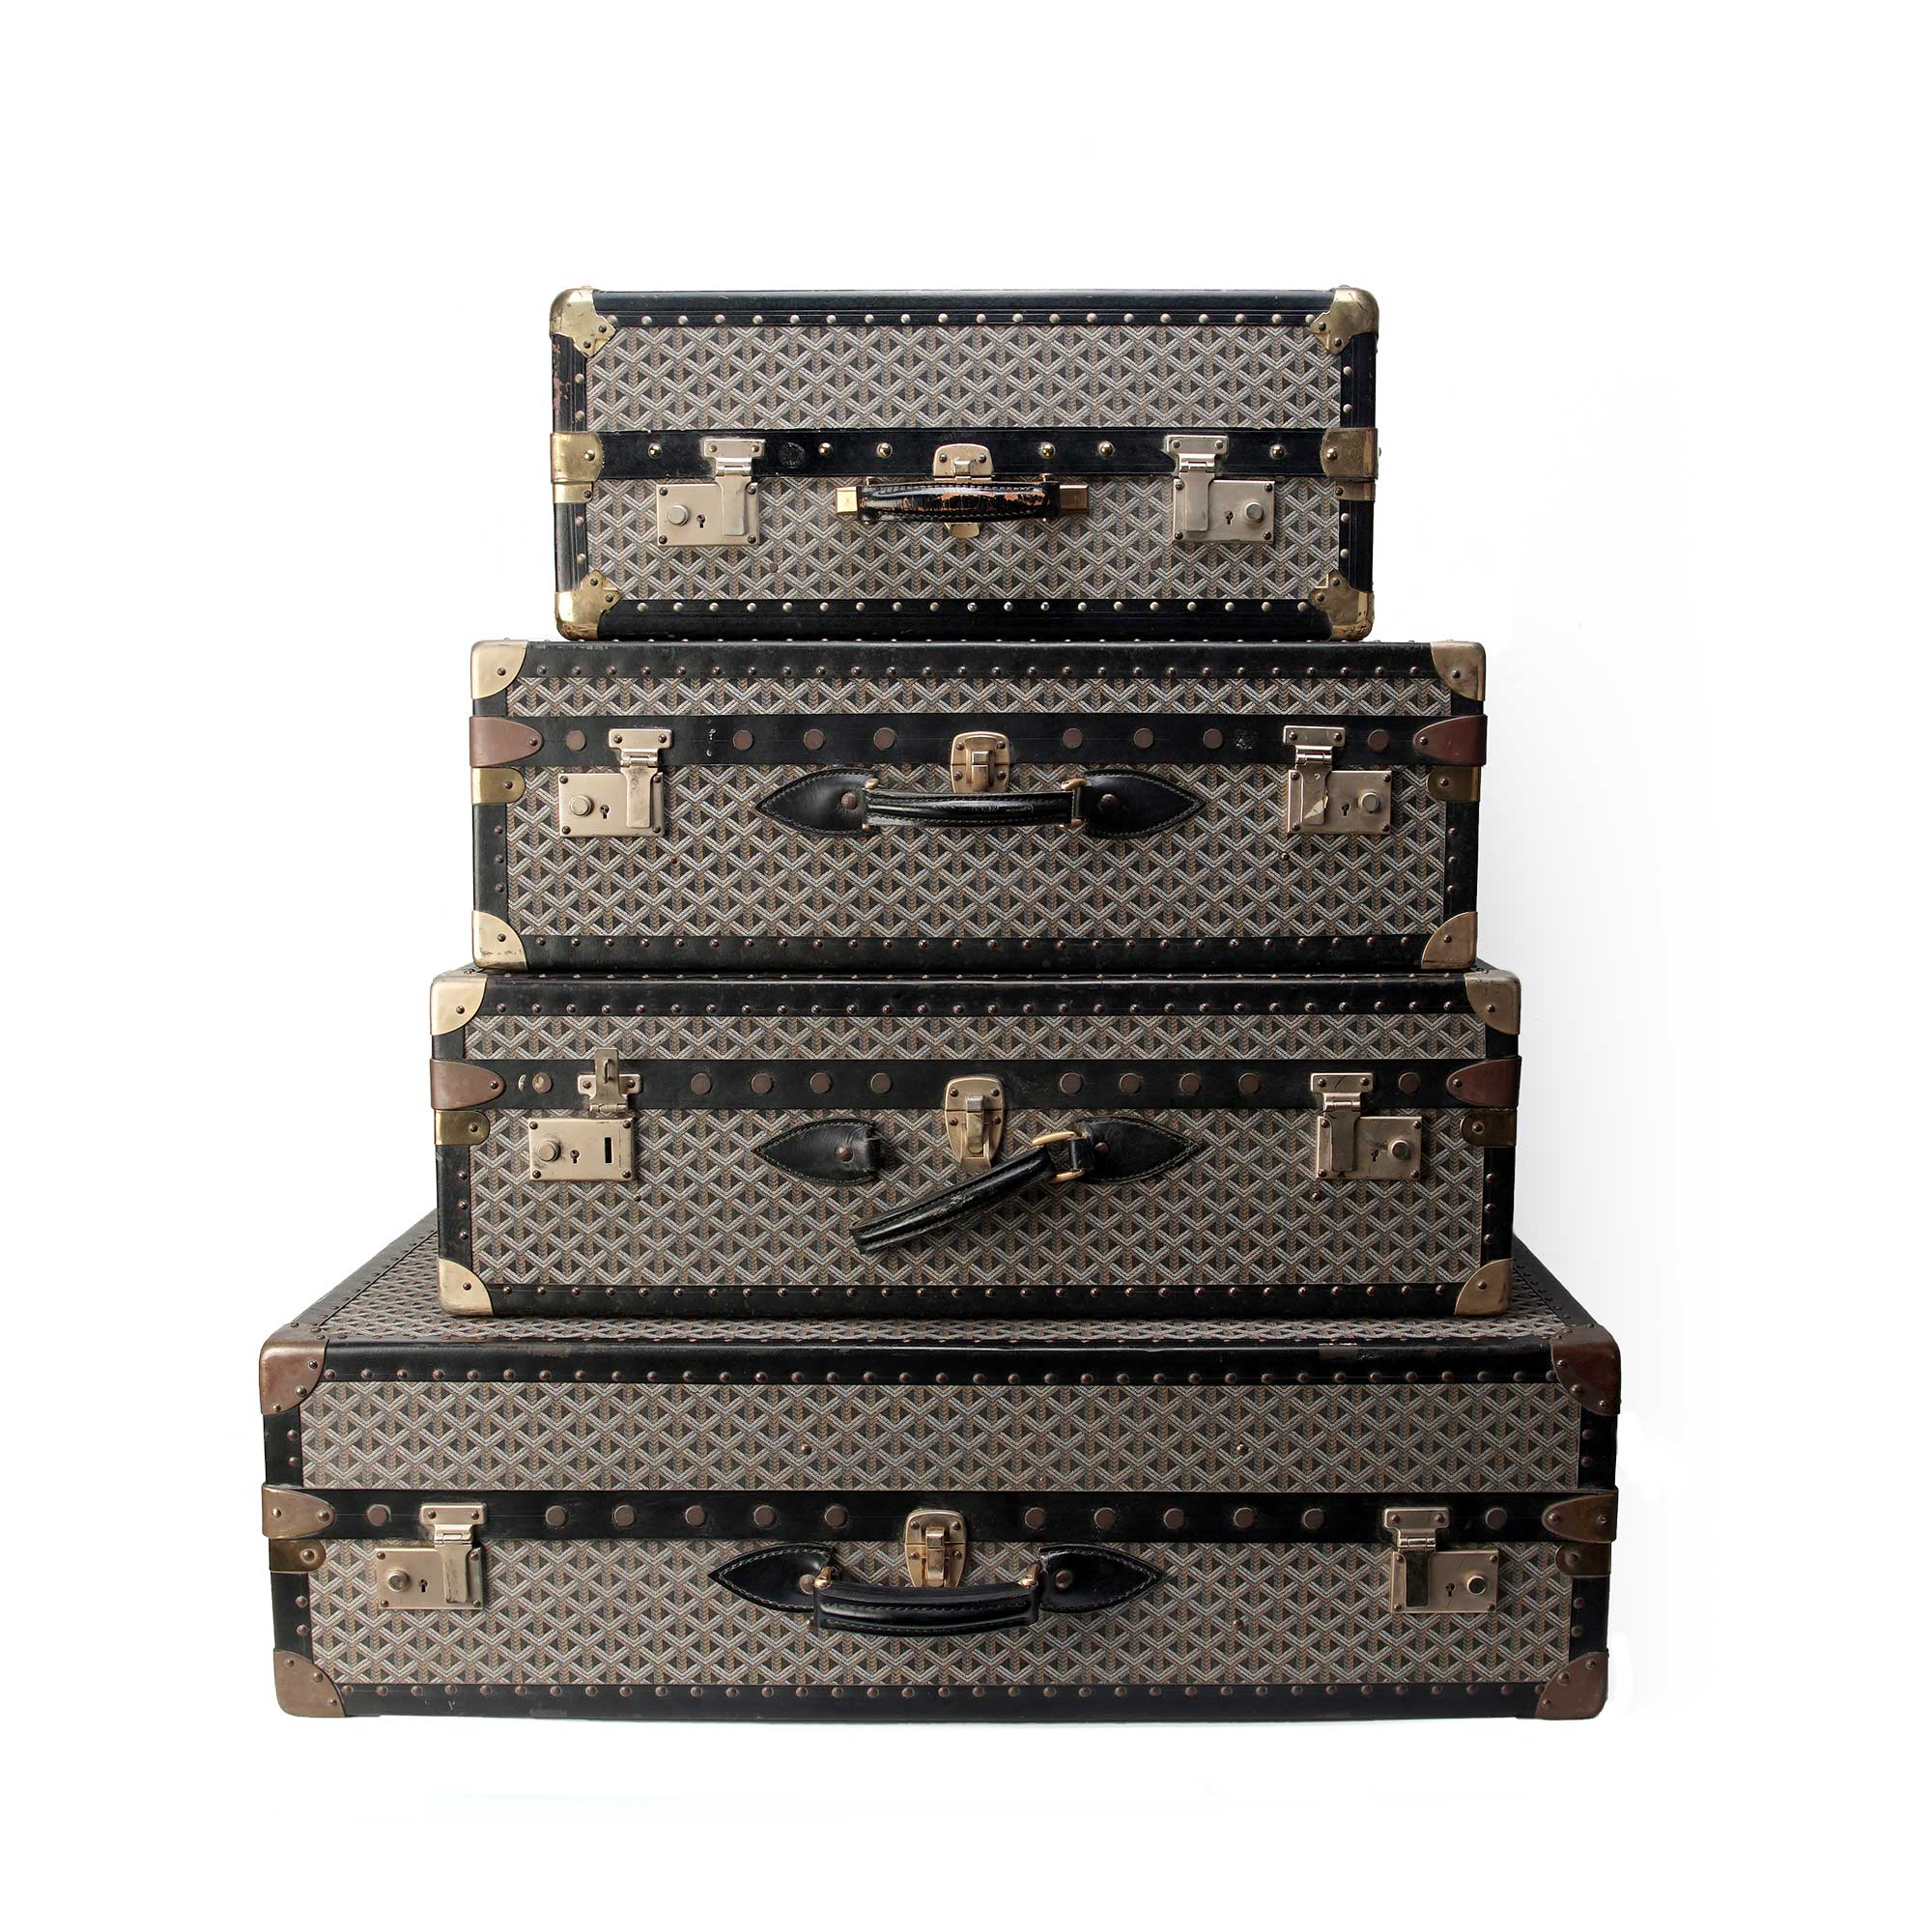 Vintage Goyard Luggage and Travel Bags - 19 For Sale at 1stDibs